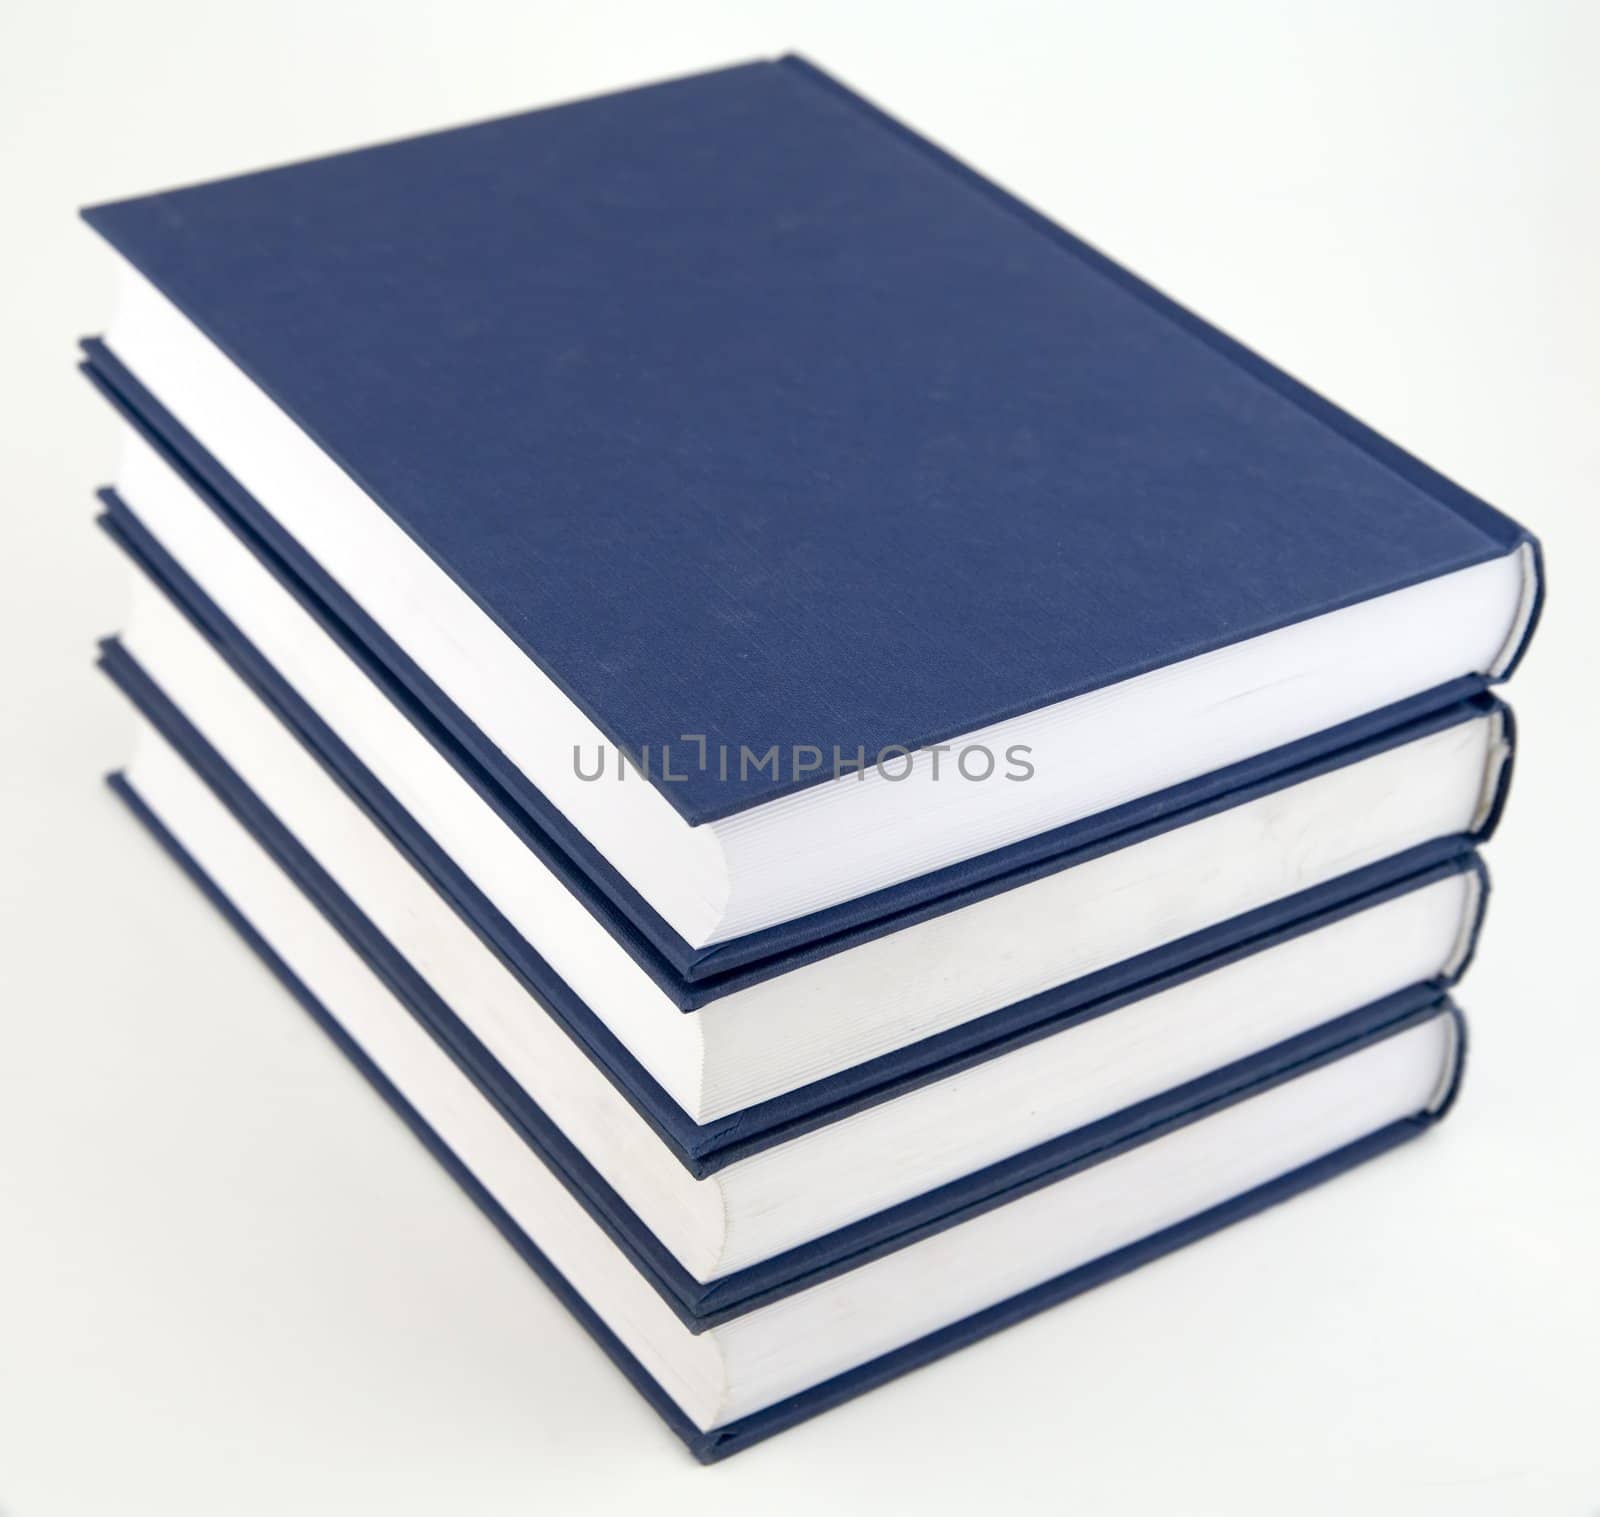 stack of books on the white background